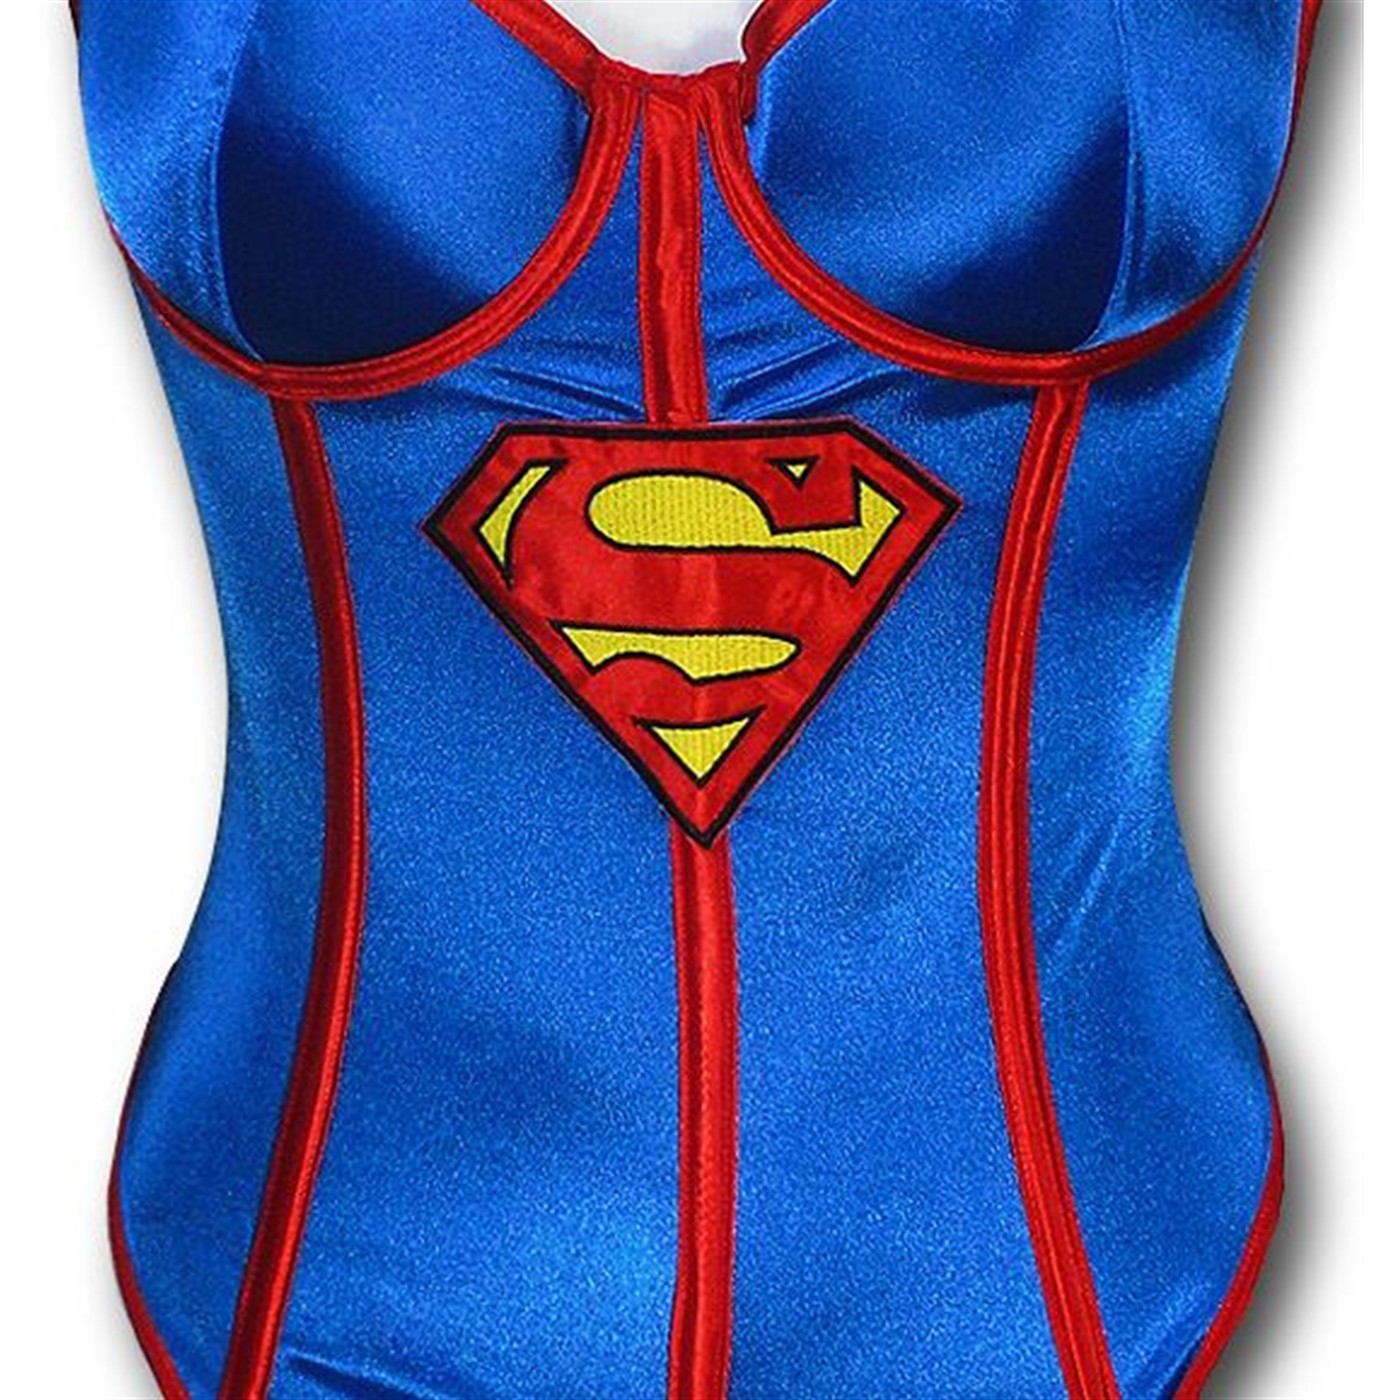 Supergirl Women's Corset and Panty Set